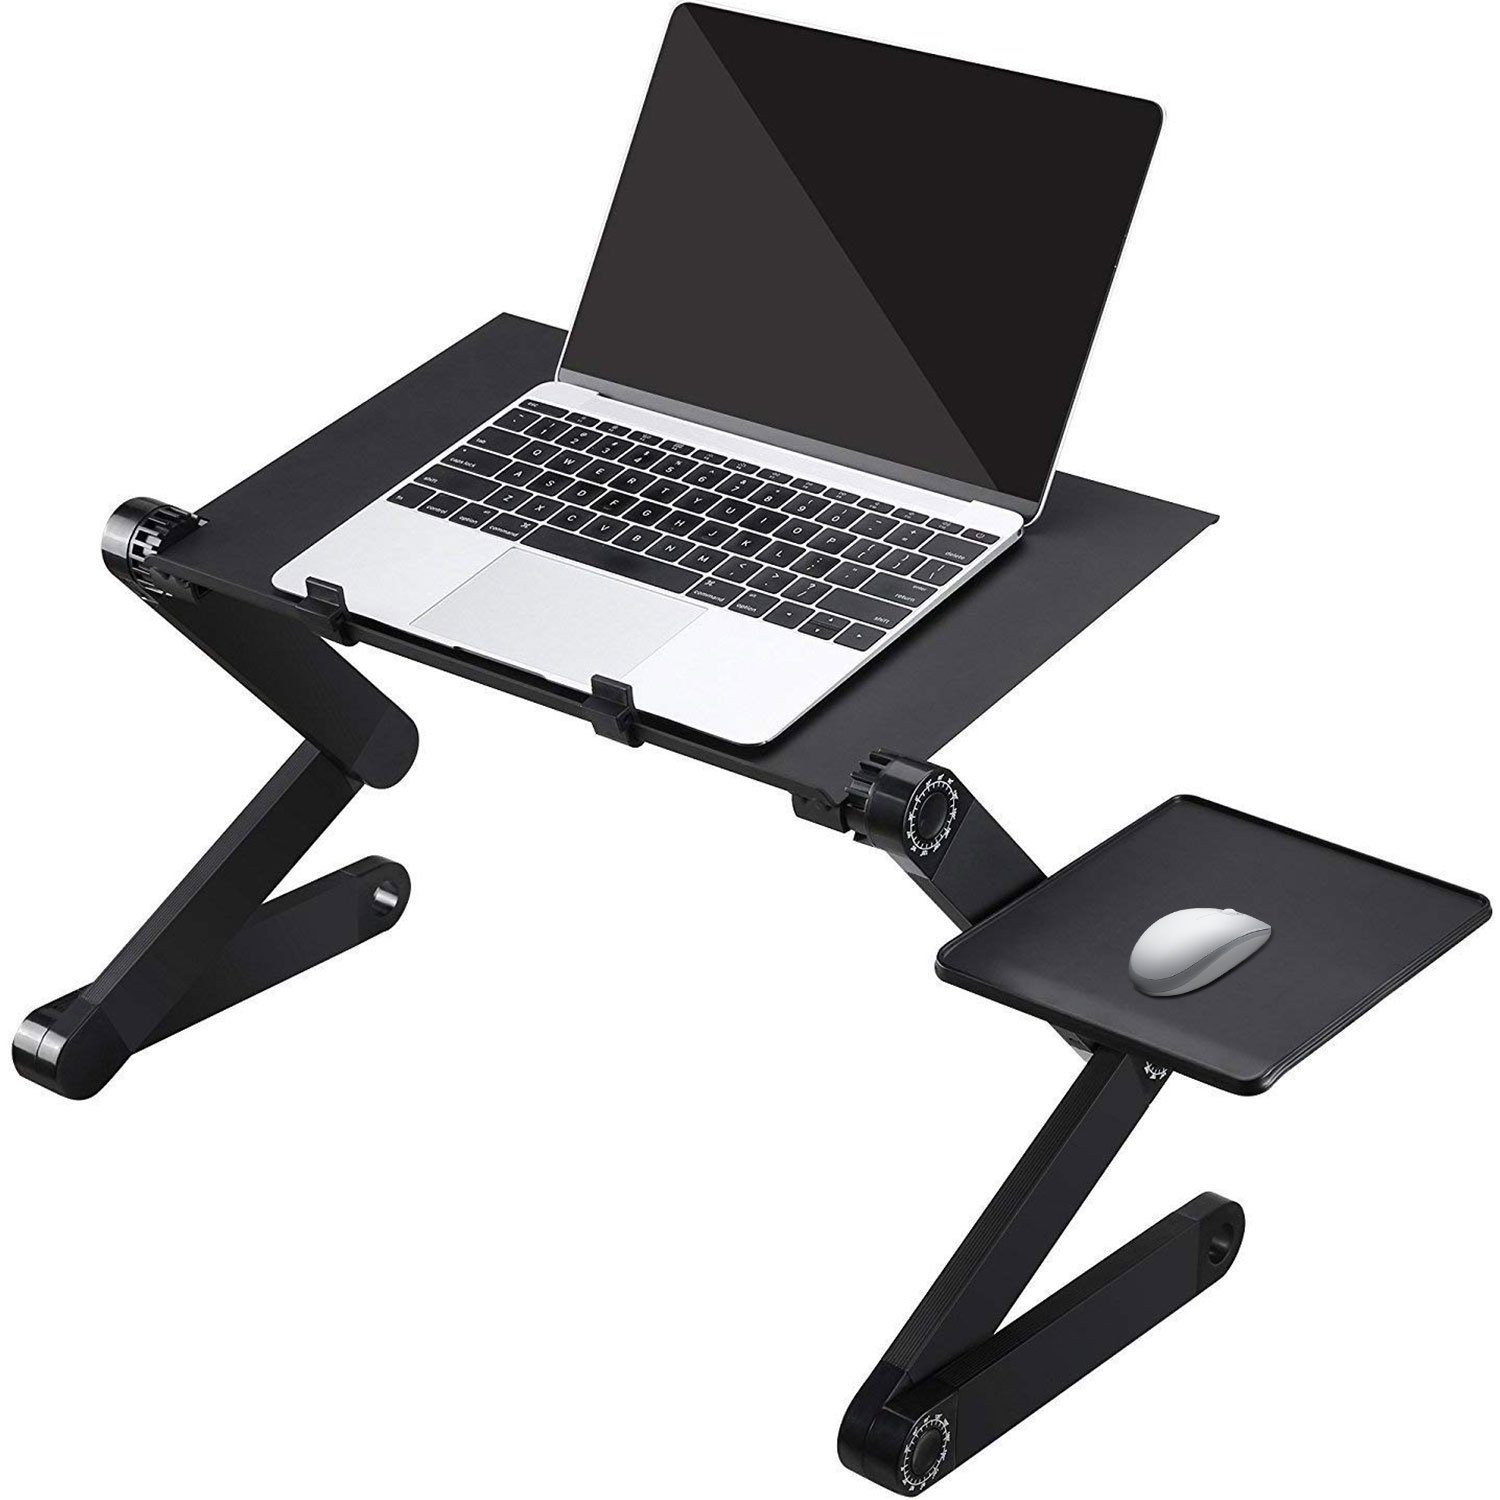 Laptop Desk for Bed,Asltoy Laptop Bed Tray Table,Foldable Lap Desk Stand Notebook Desk Adjustable Laptop Table for Bed Portable Notebook Bed Tray Lap Tablet with Cup Holder Khaki 